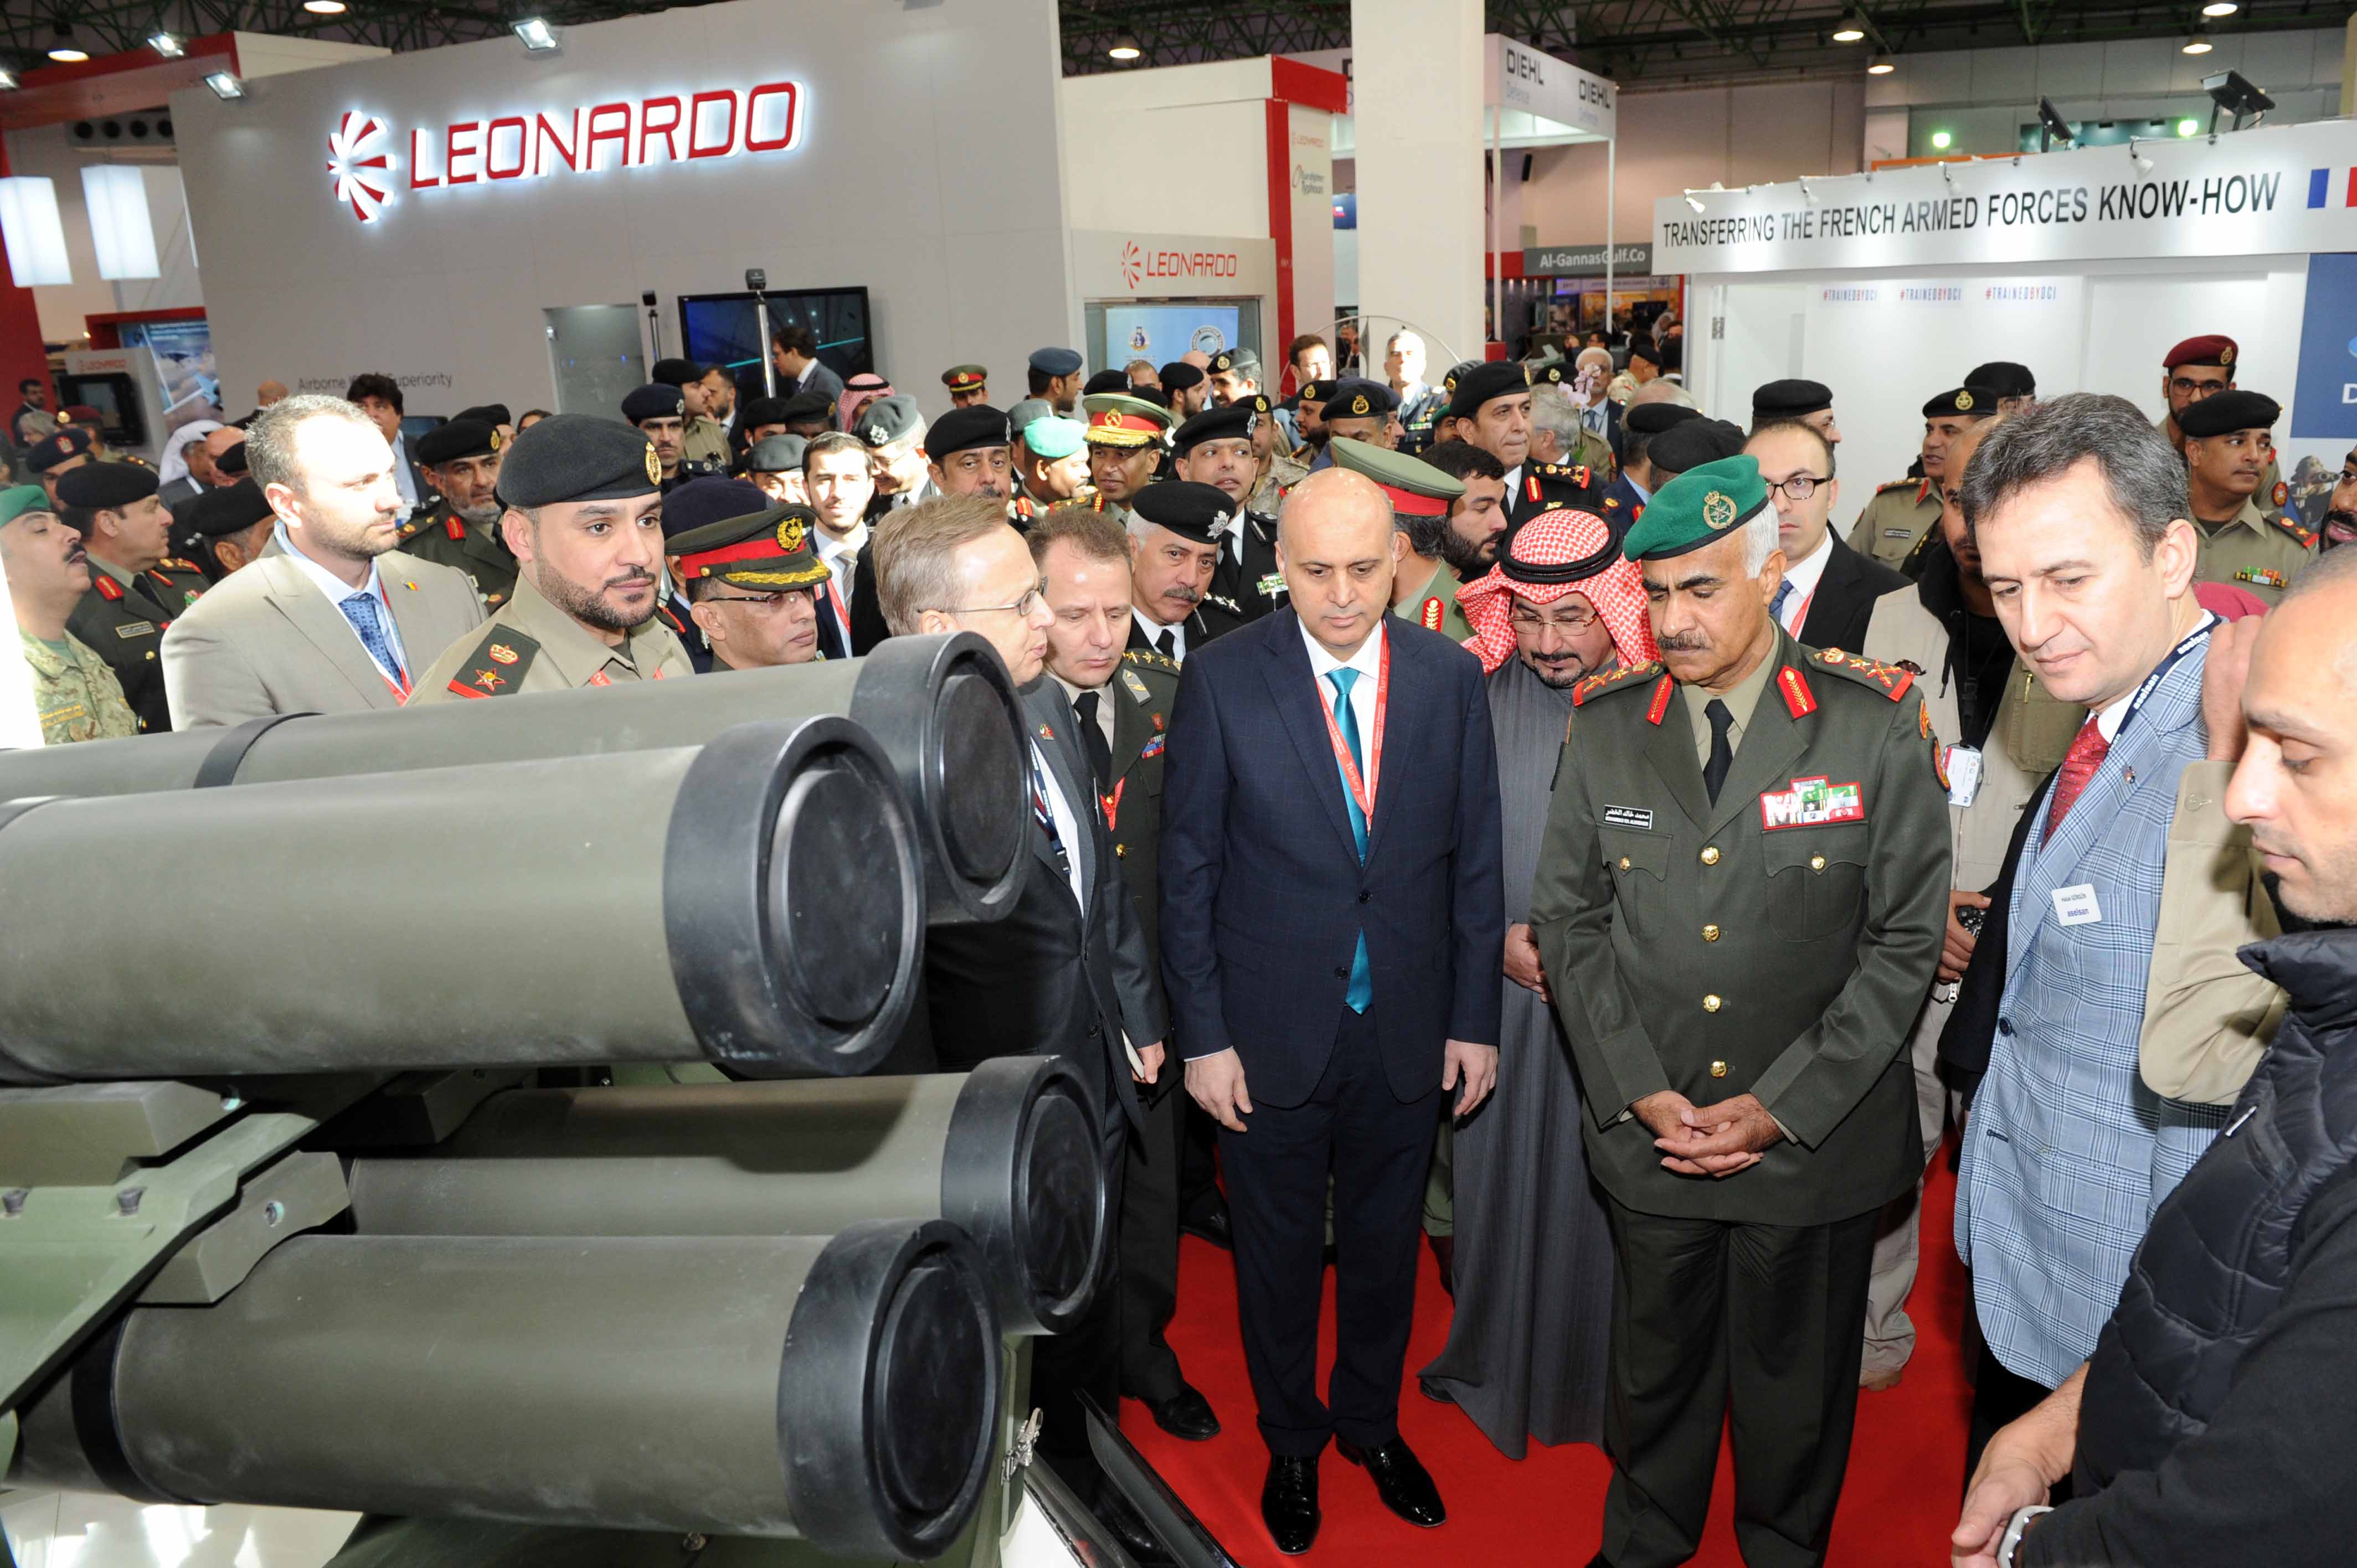 Kuwaiti Army's Chief of Staff Lieutenant General Mohammad Al-Khoder touring the Gulf Defense and Aerospace Exhibition